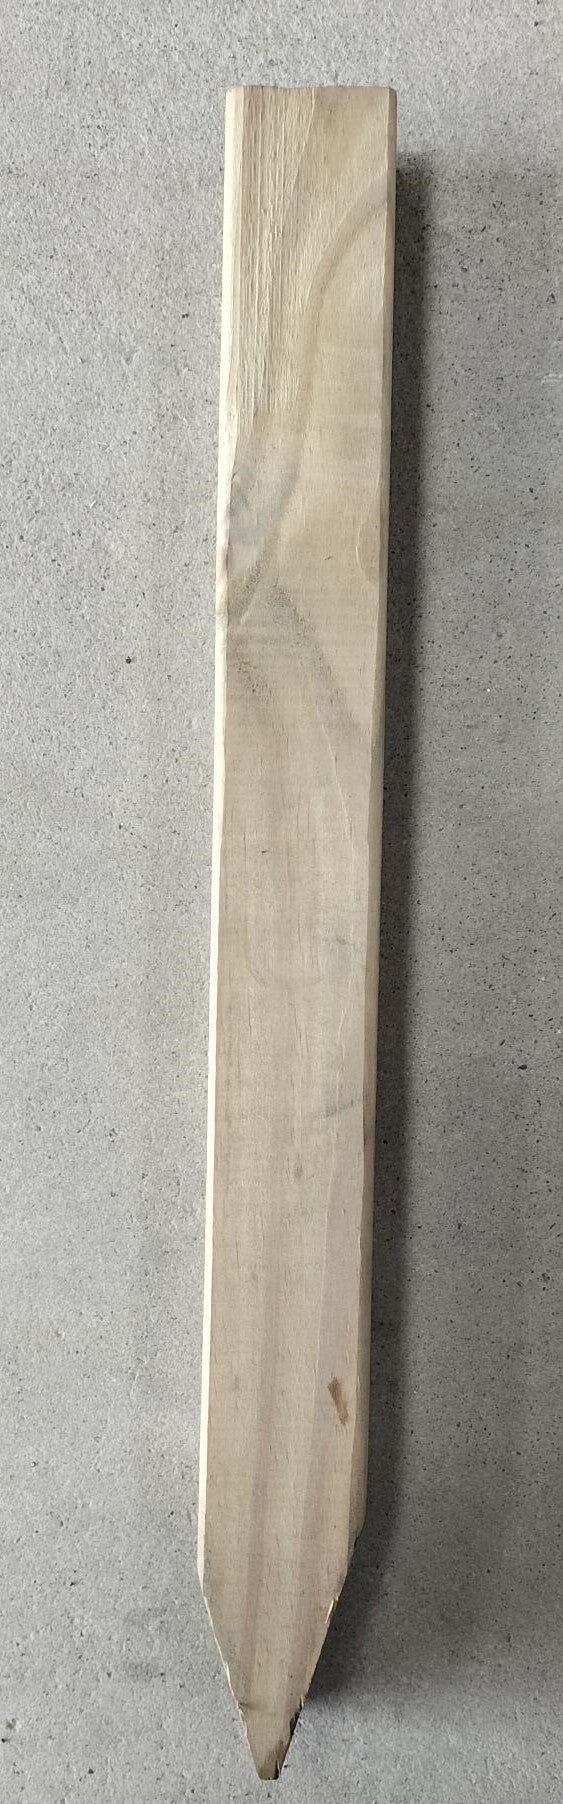 PEG 45x45 H4 MG Pointed 450mm